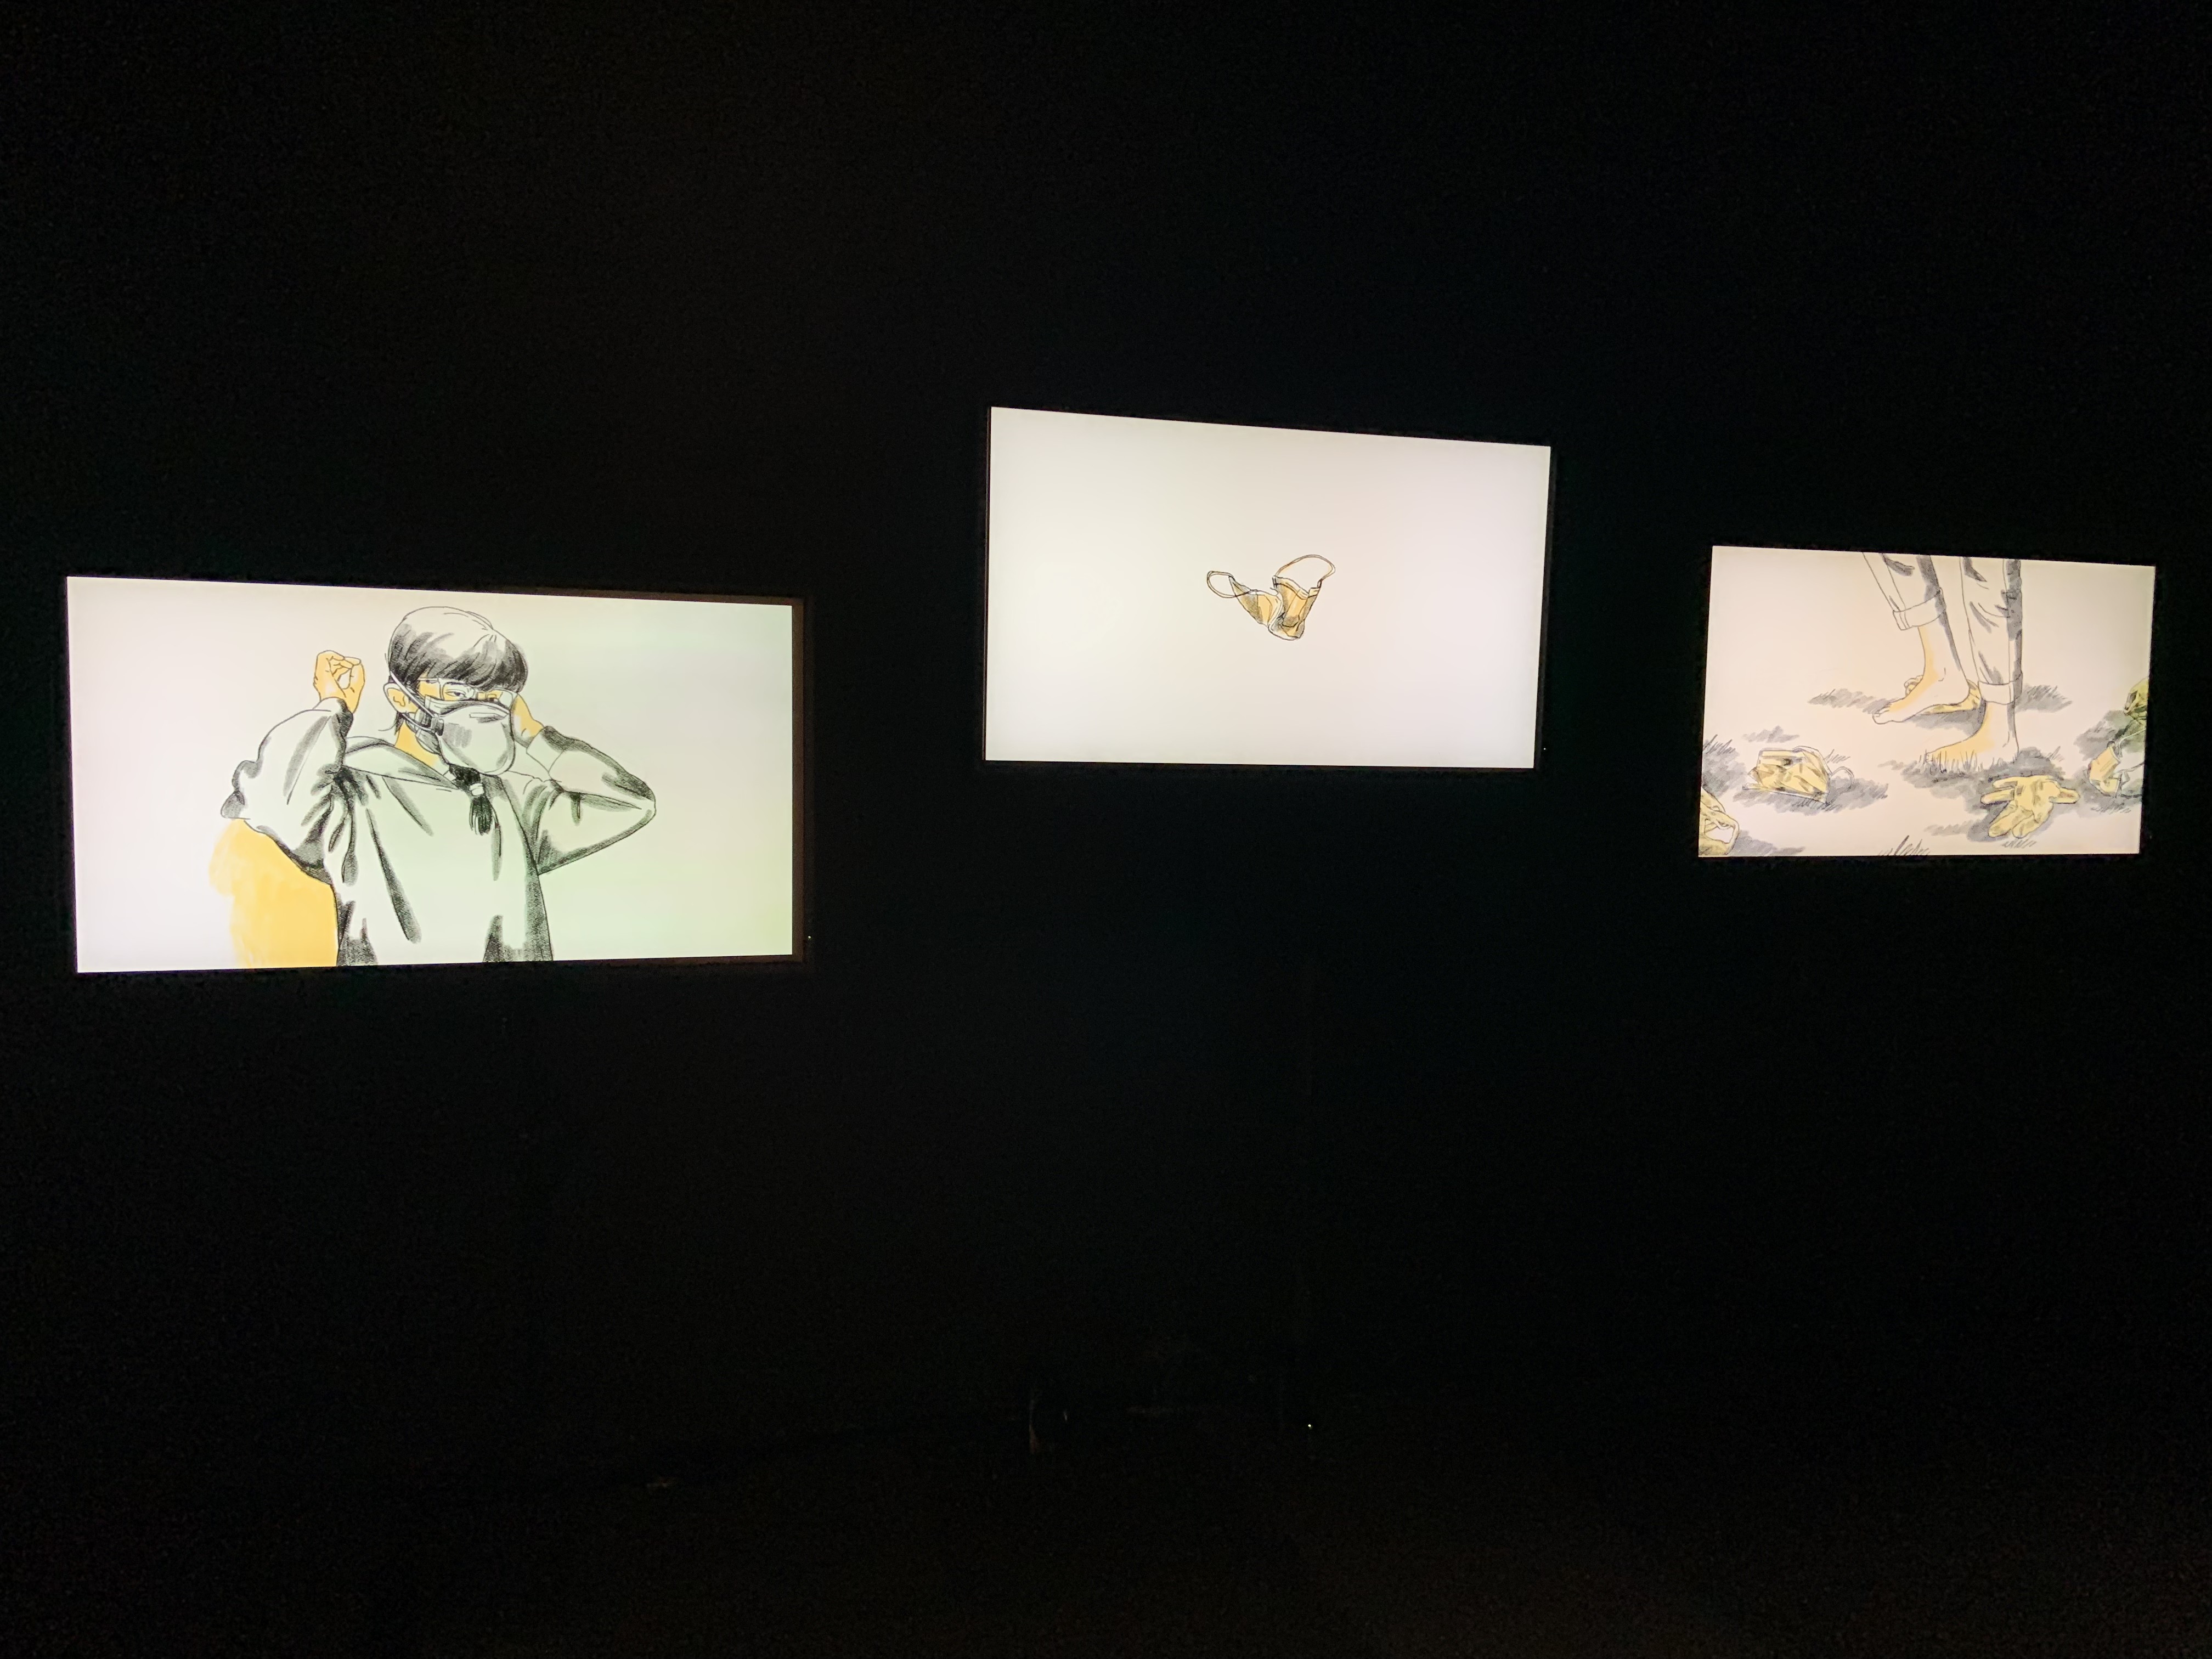 Maedeh Mosaverzadeh: Living with the trouble (installation view)